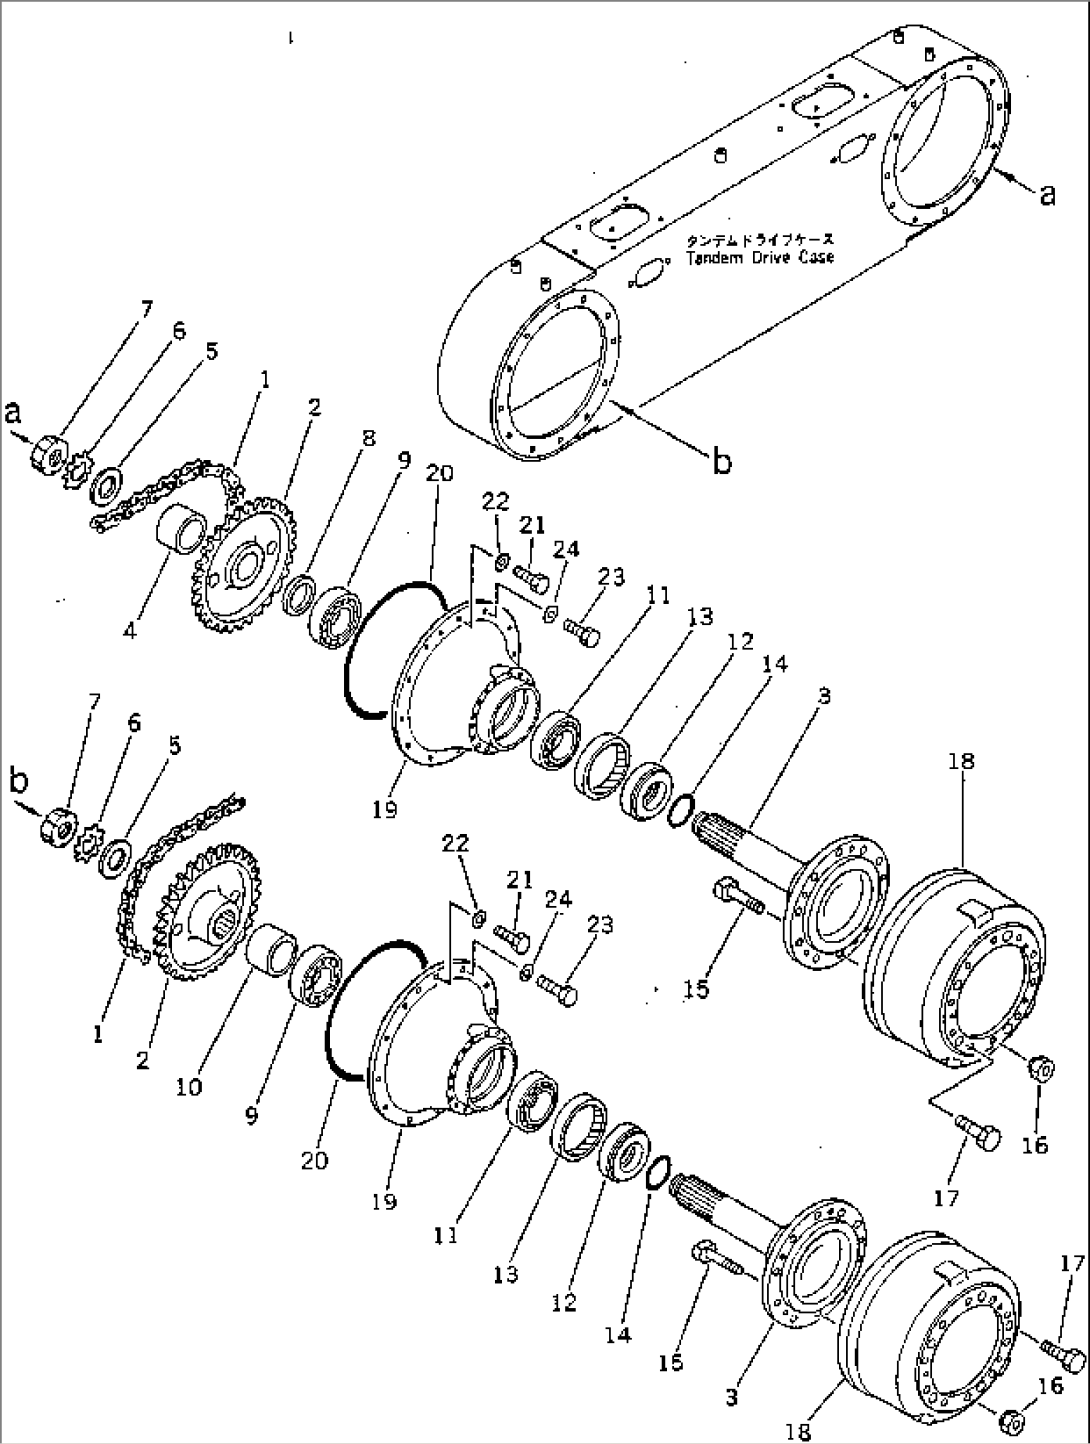 TANDEM DRIVE CASE AND CHAIN